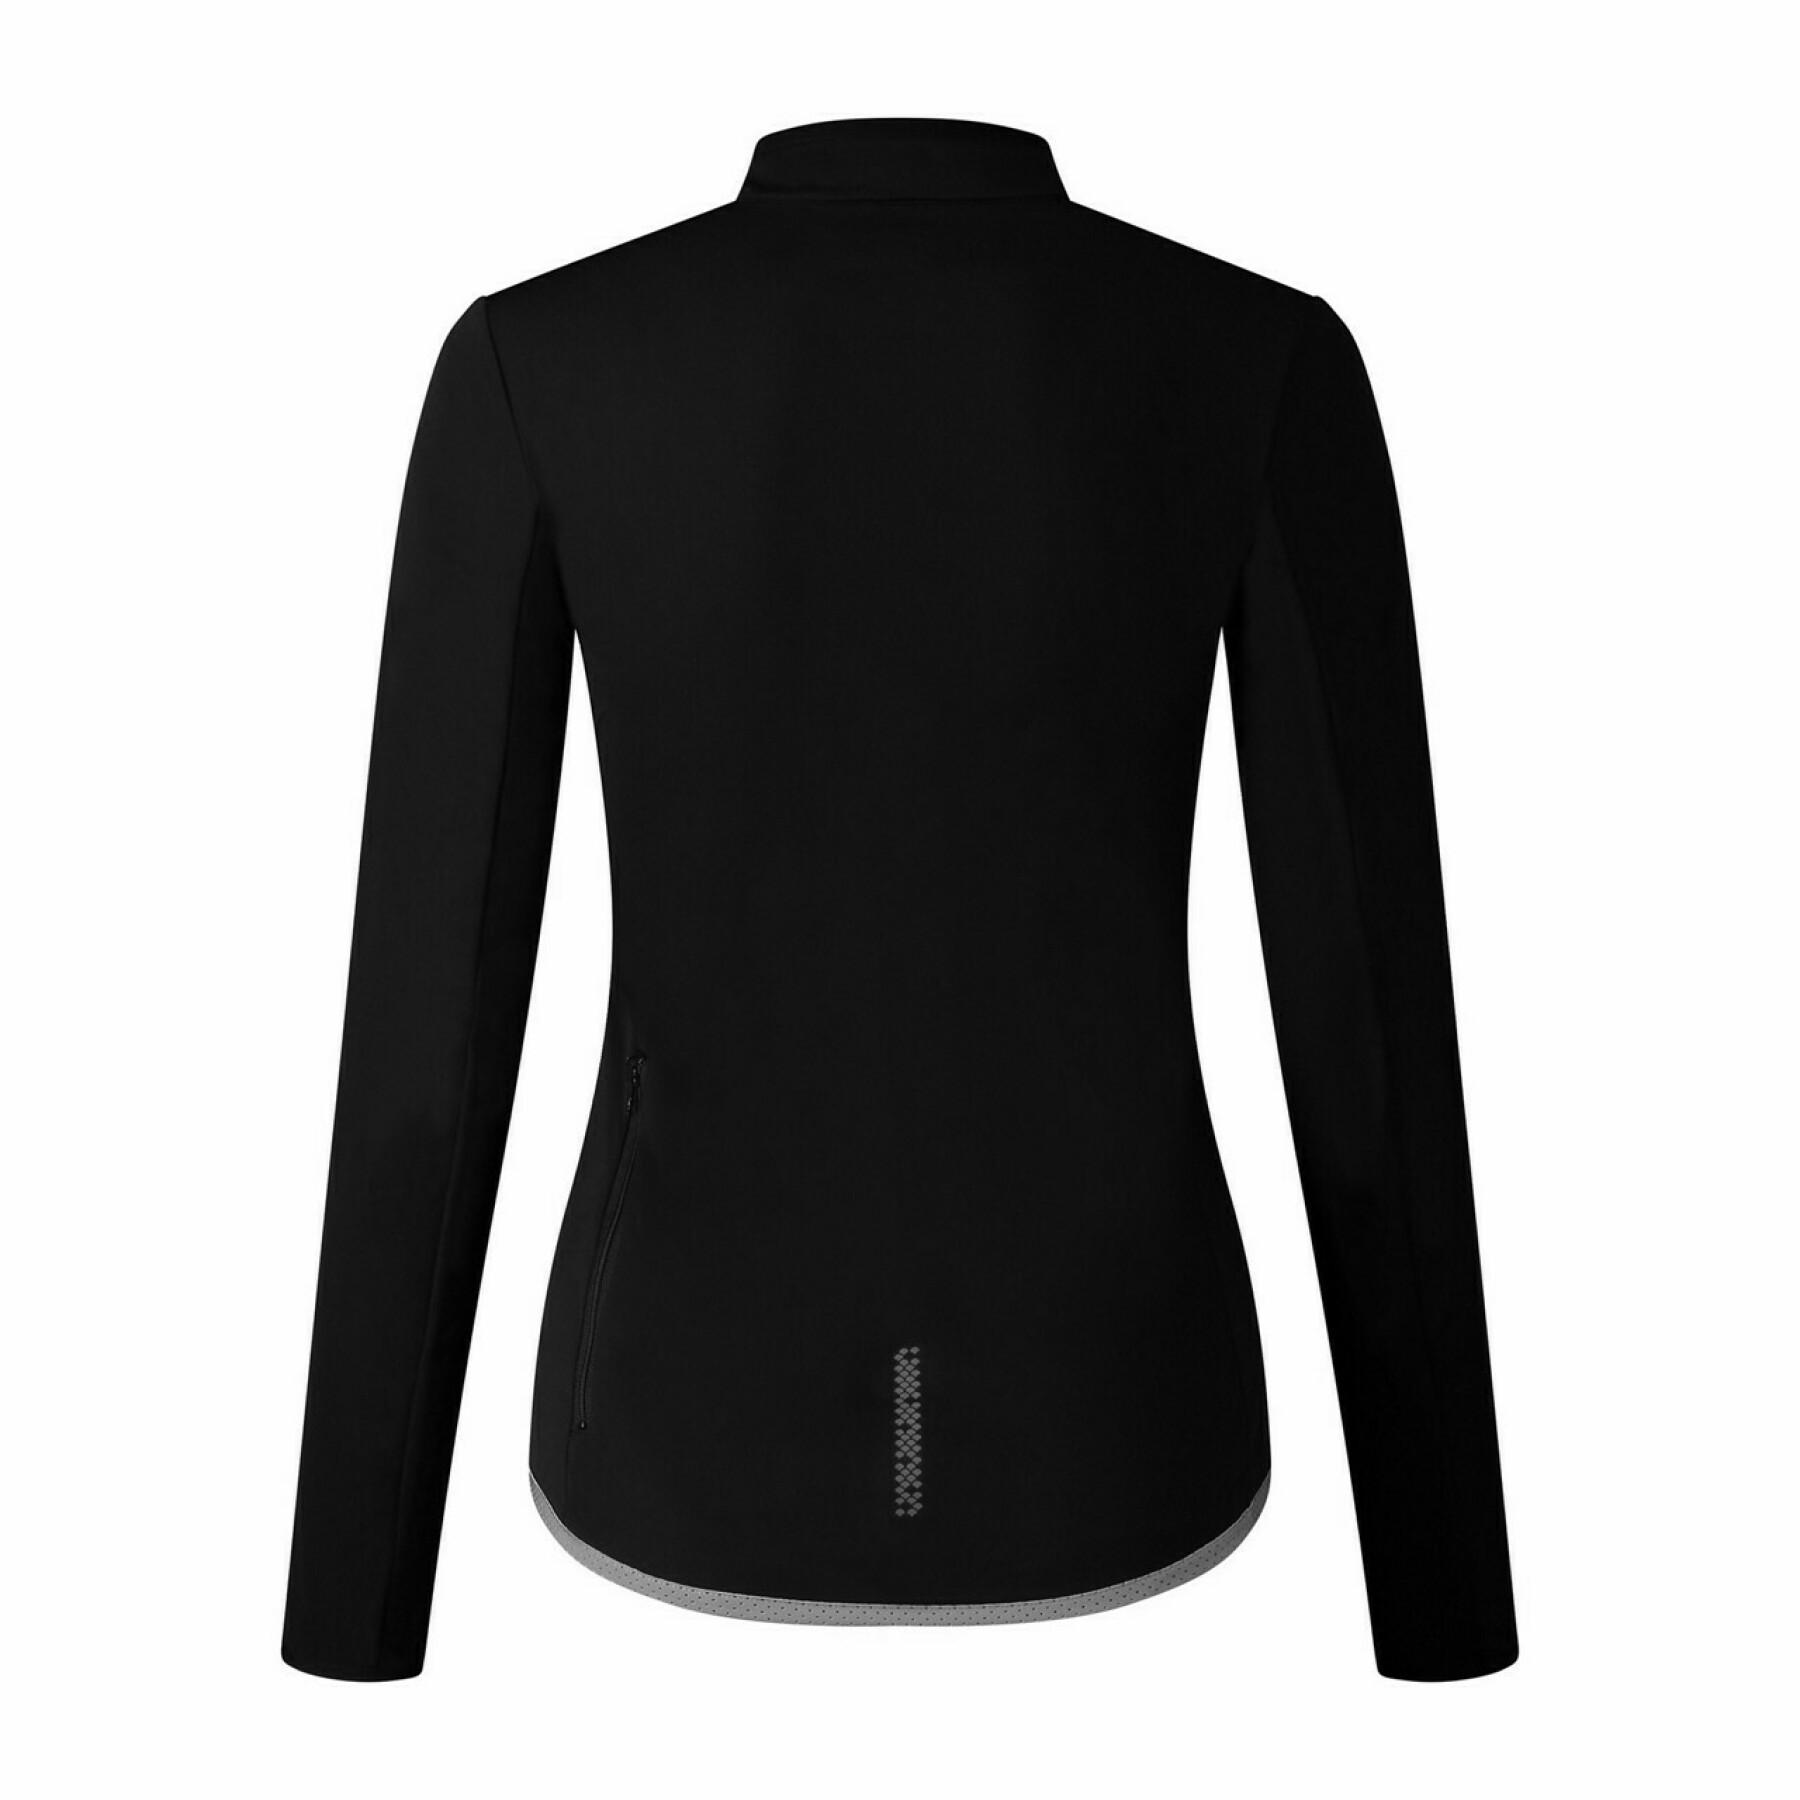 Chaqueta impermeable mujer Shimano Windflex